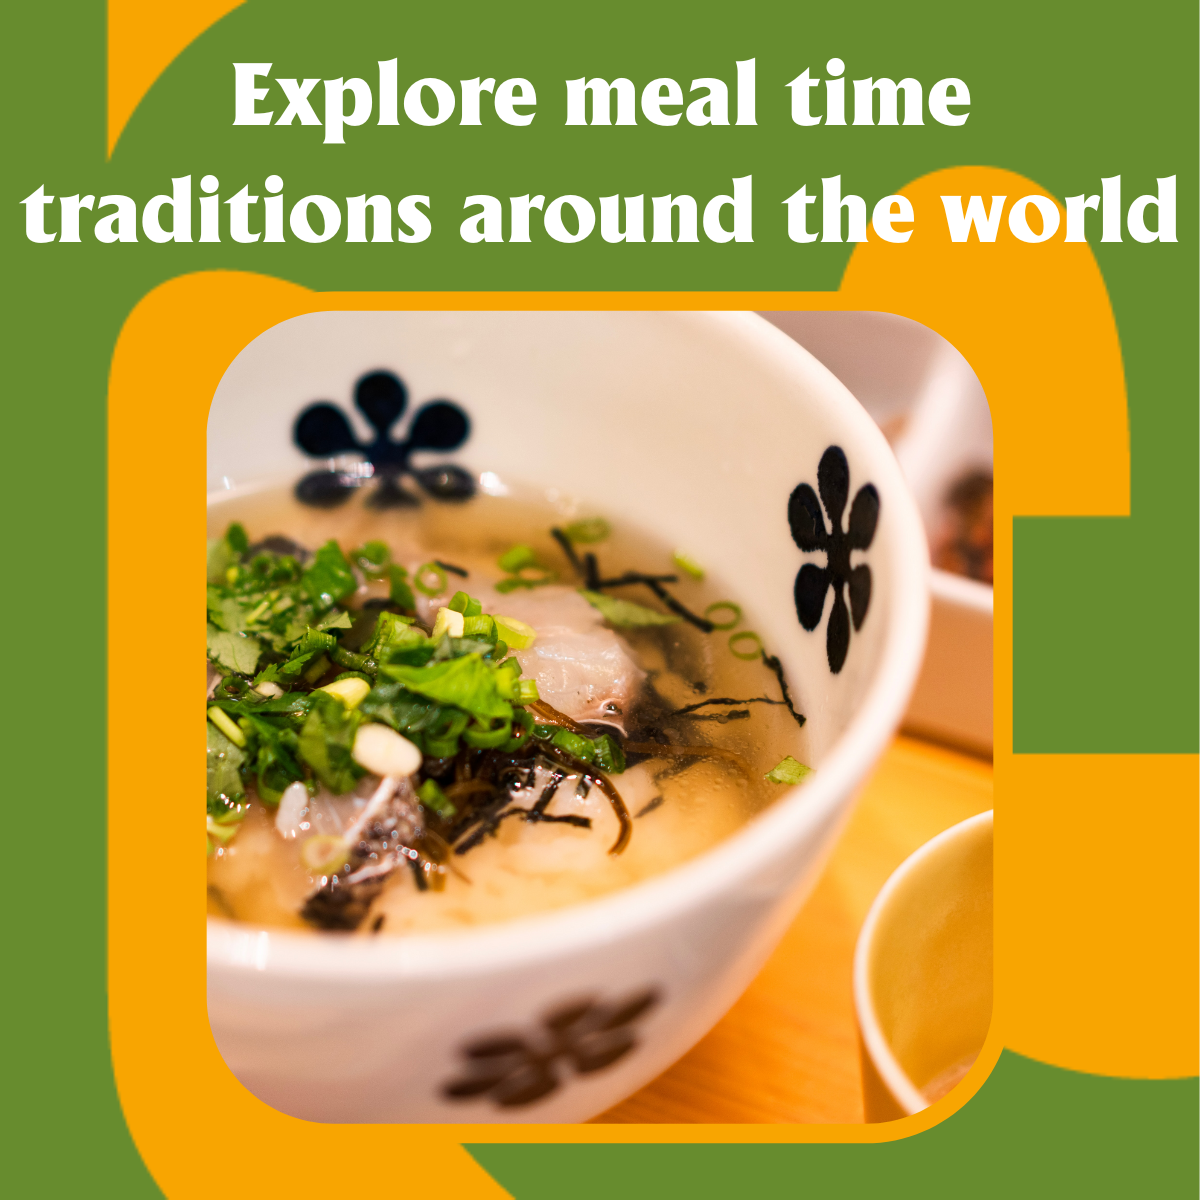 Meal time traditions around the world